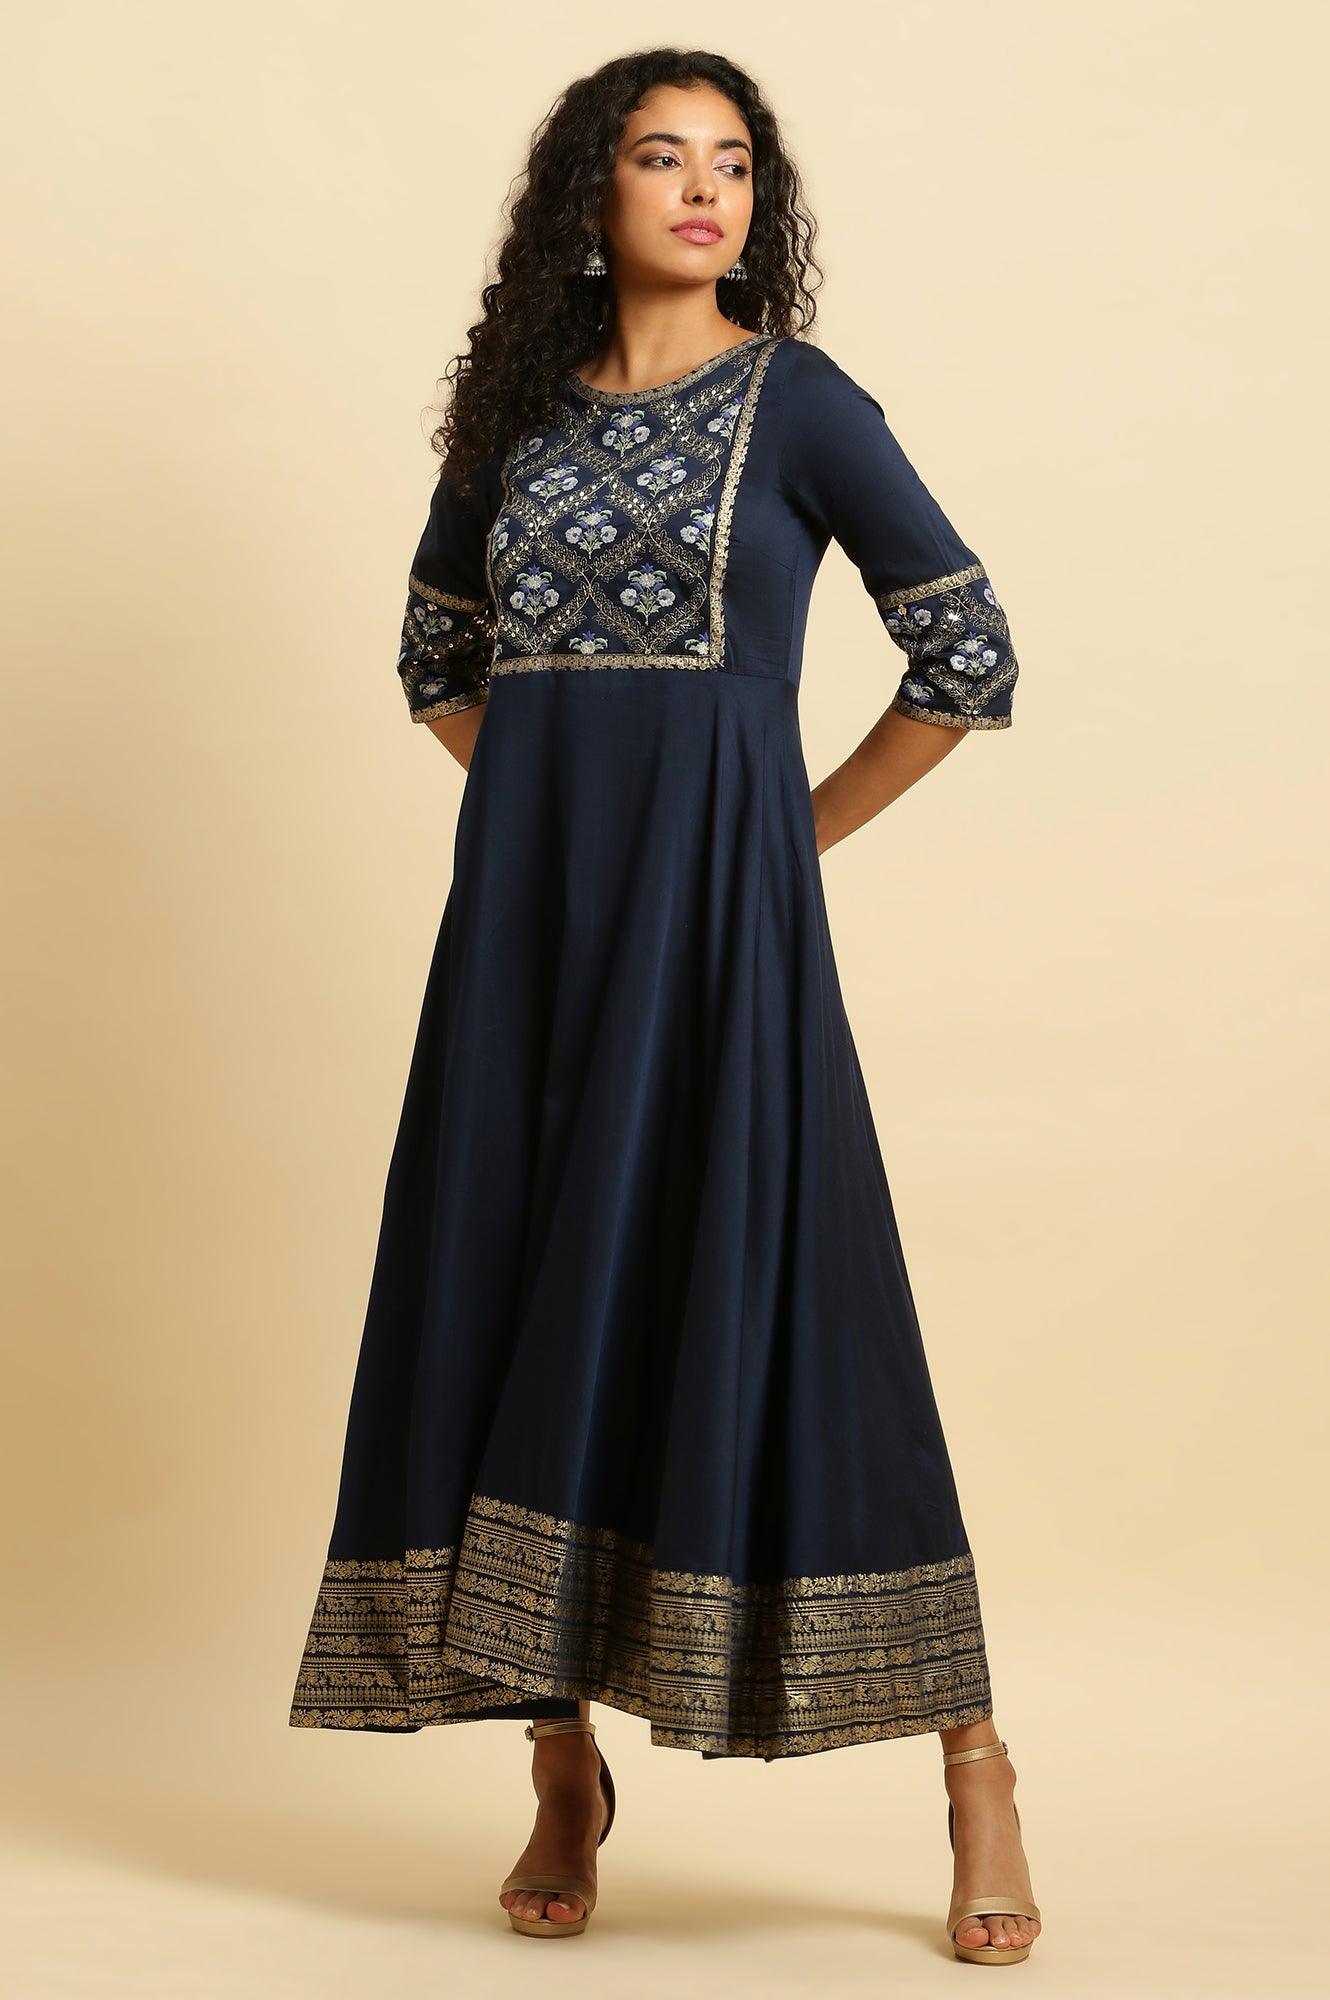 Blue Panelled Embroidered Festive Dress - wforwoman